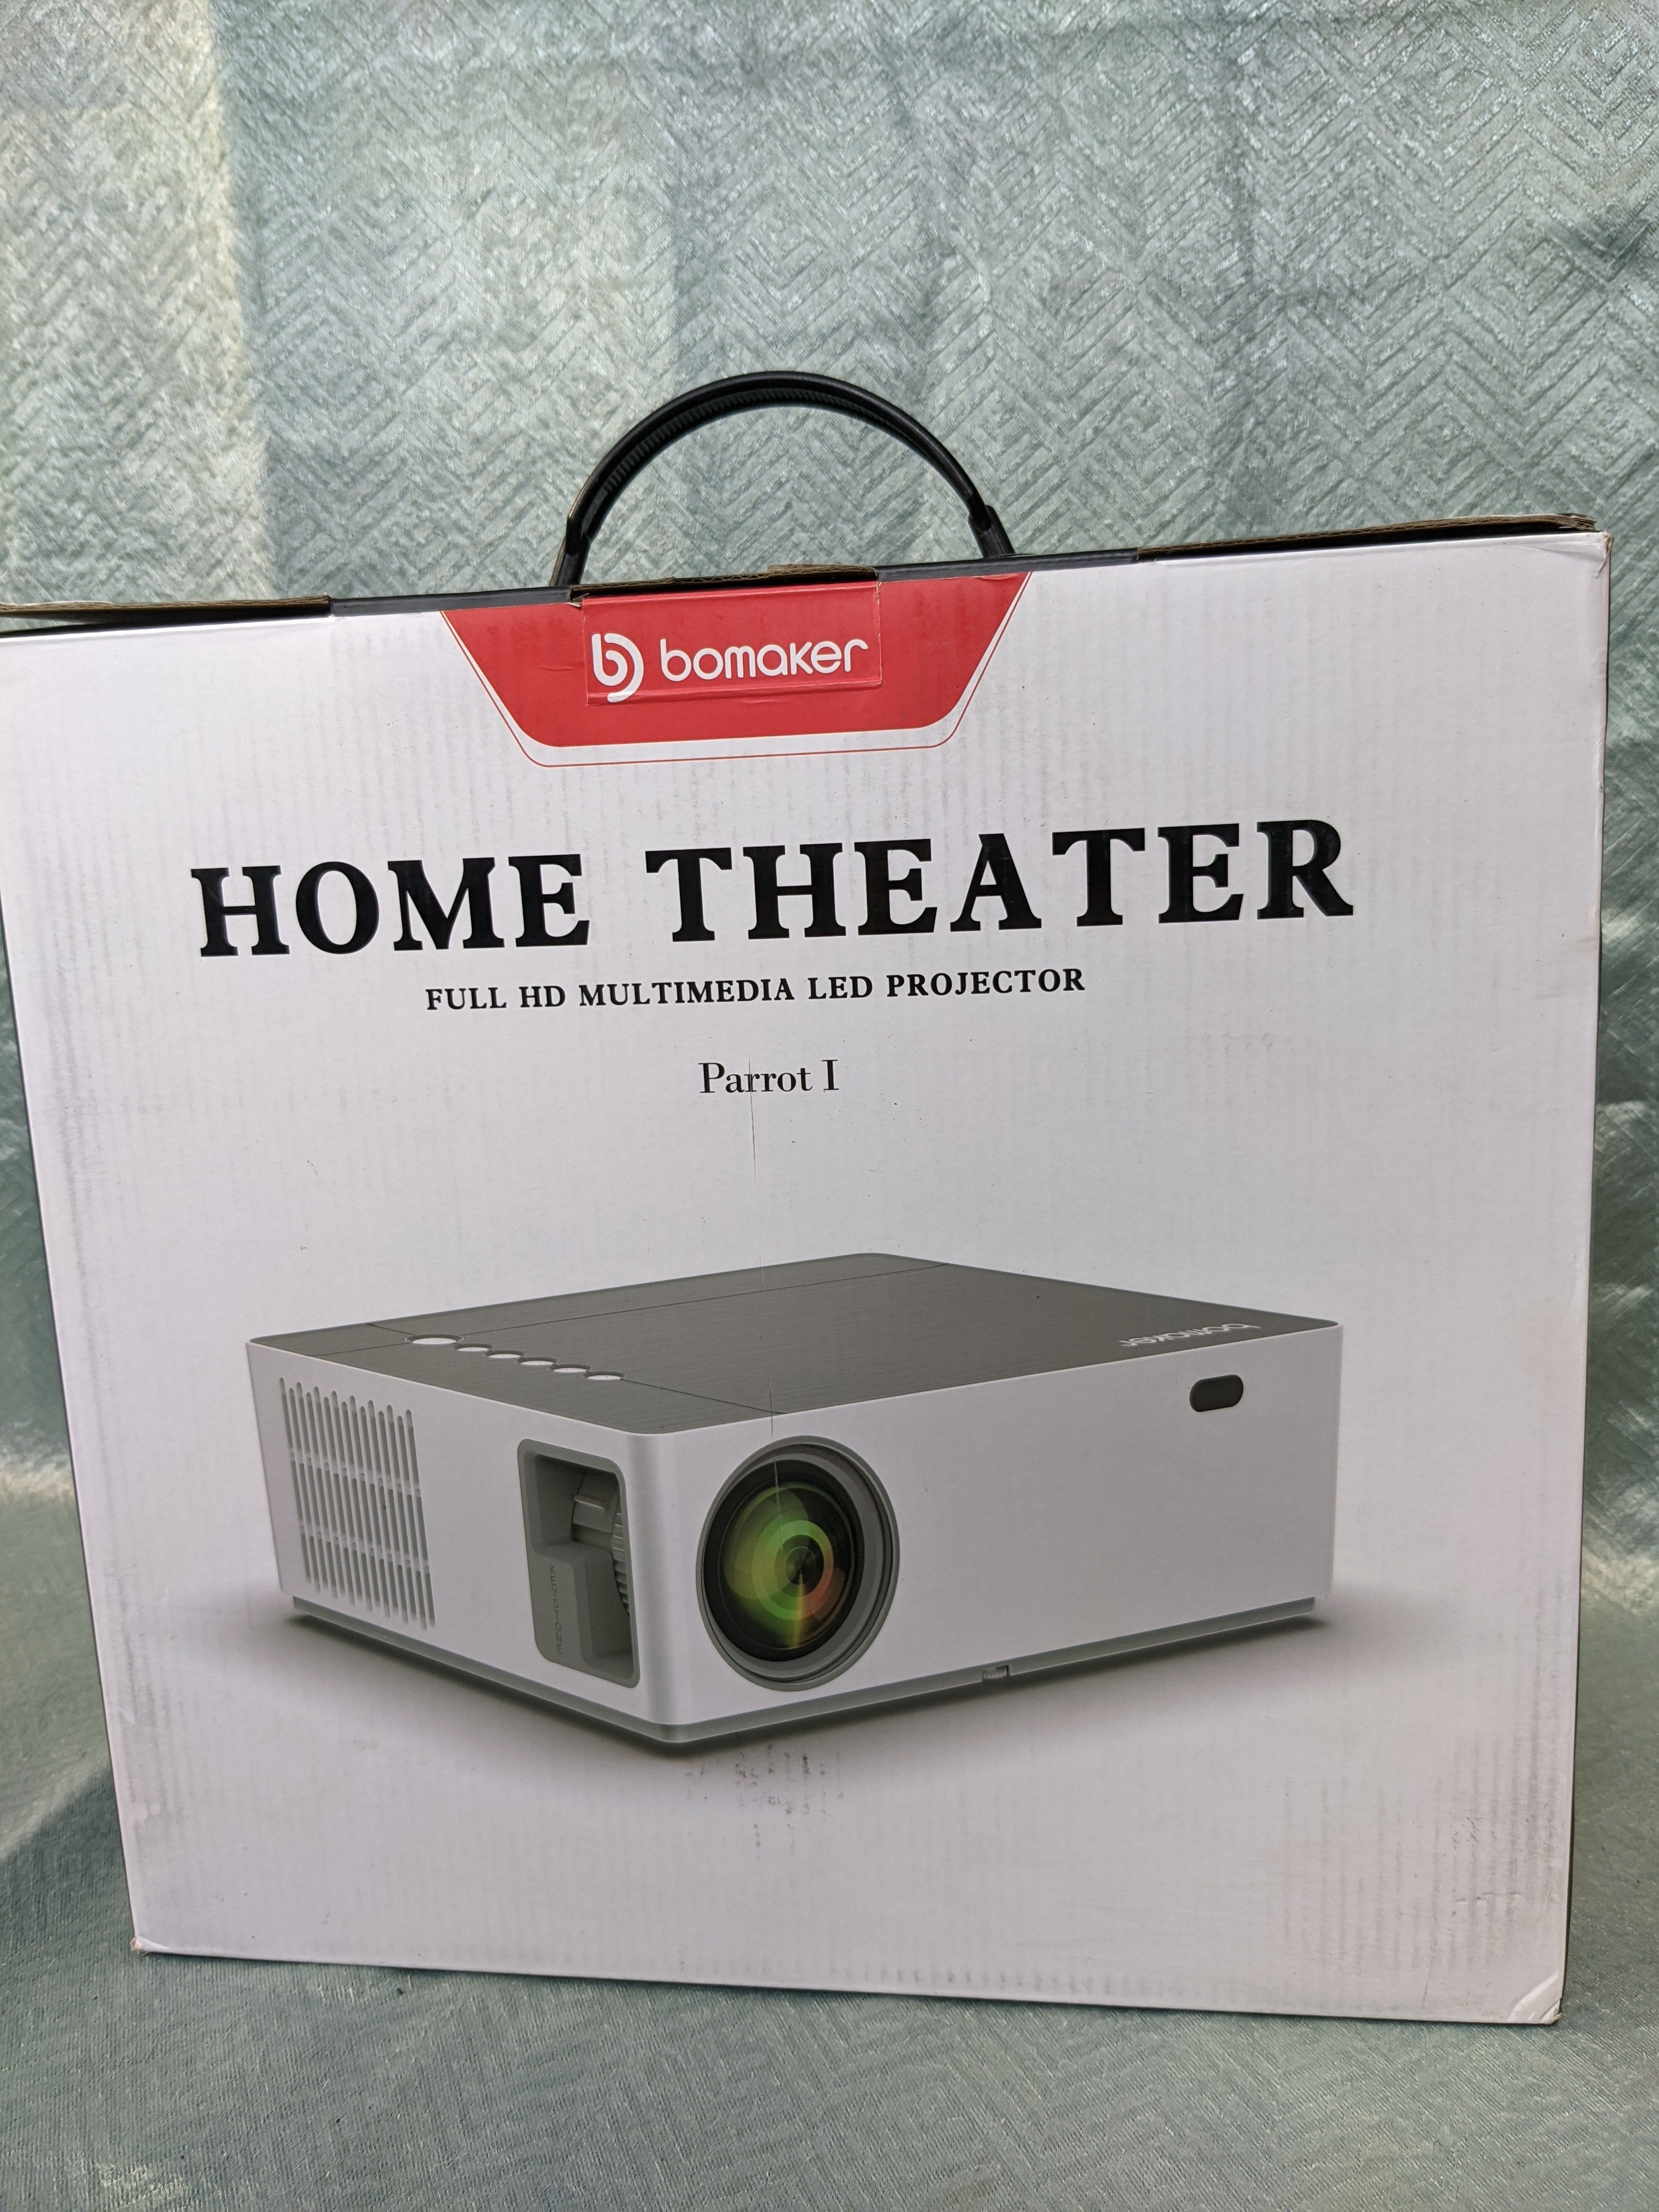 Bomaker Home Theater Full HD MultiMedia LED Projector Parrot I (7591650328814)